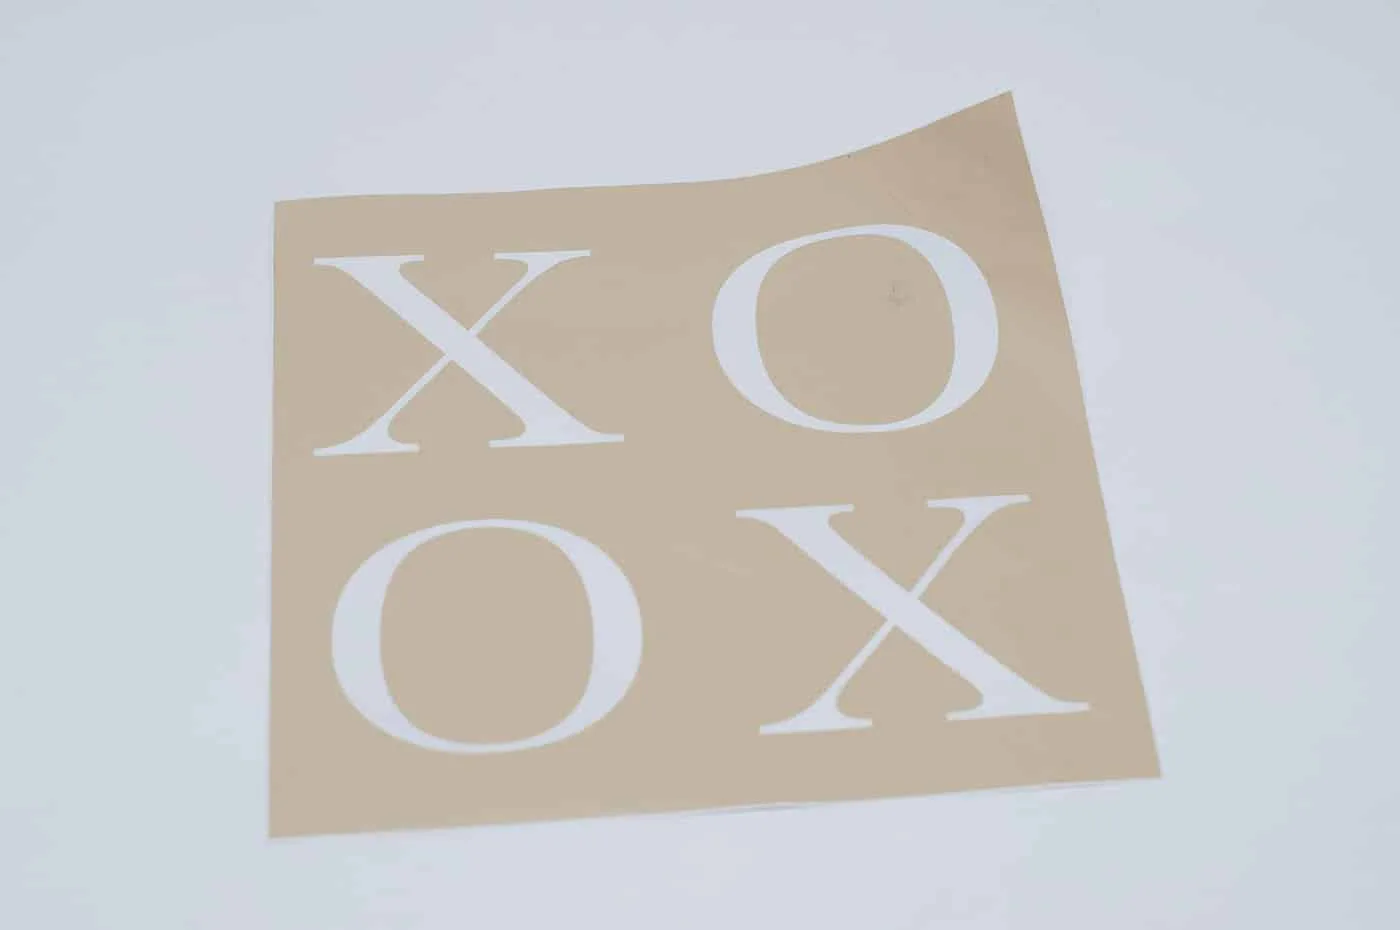 XOXO vinyl letters cut using a Silhouette